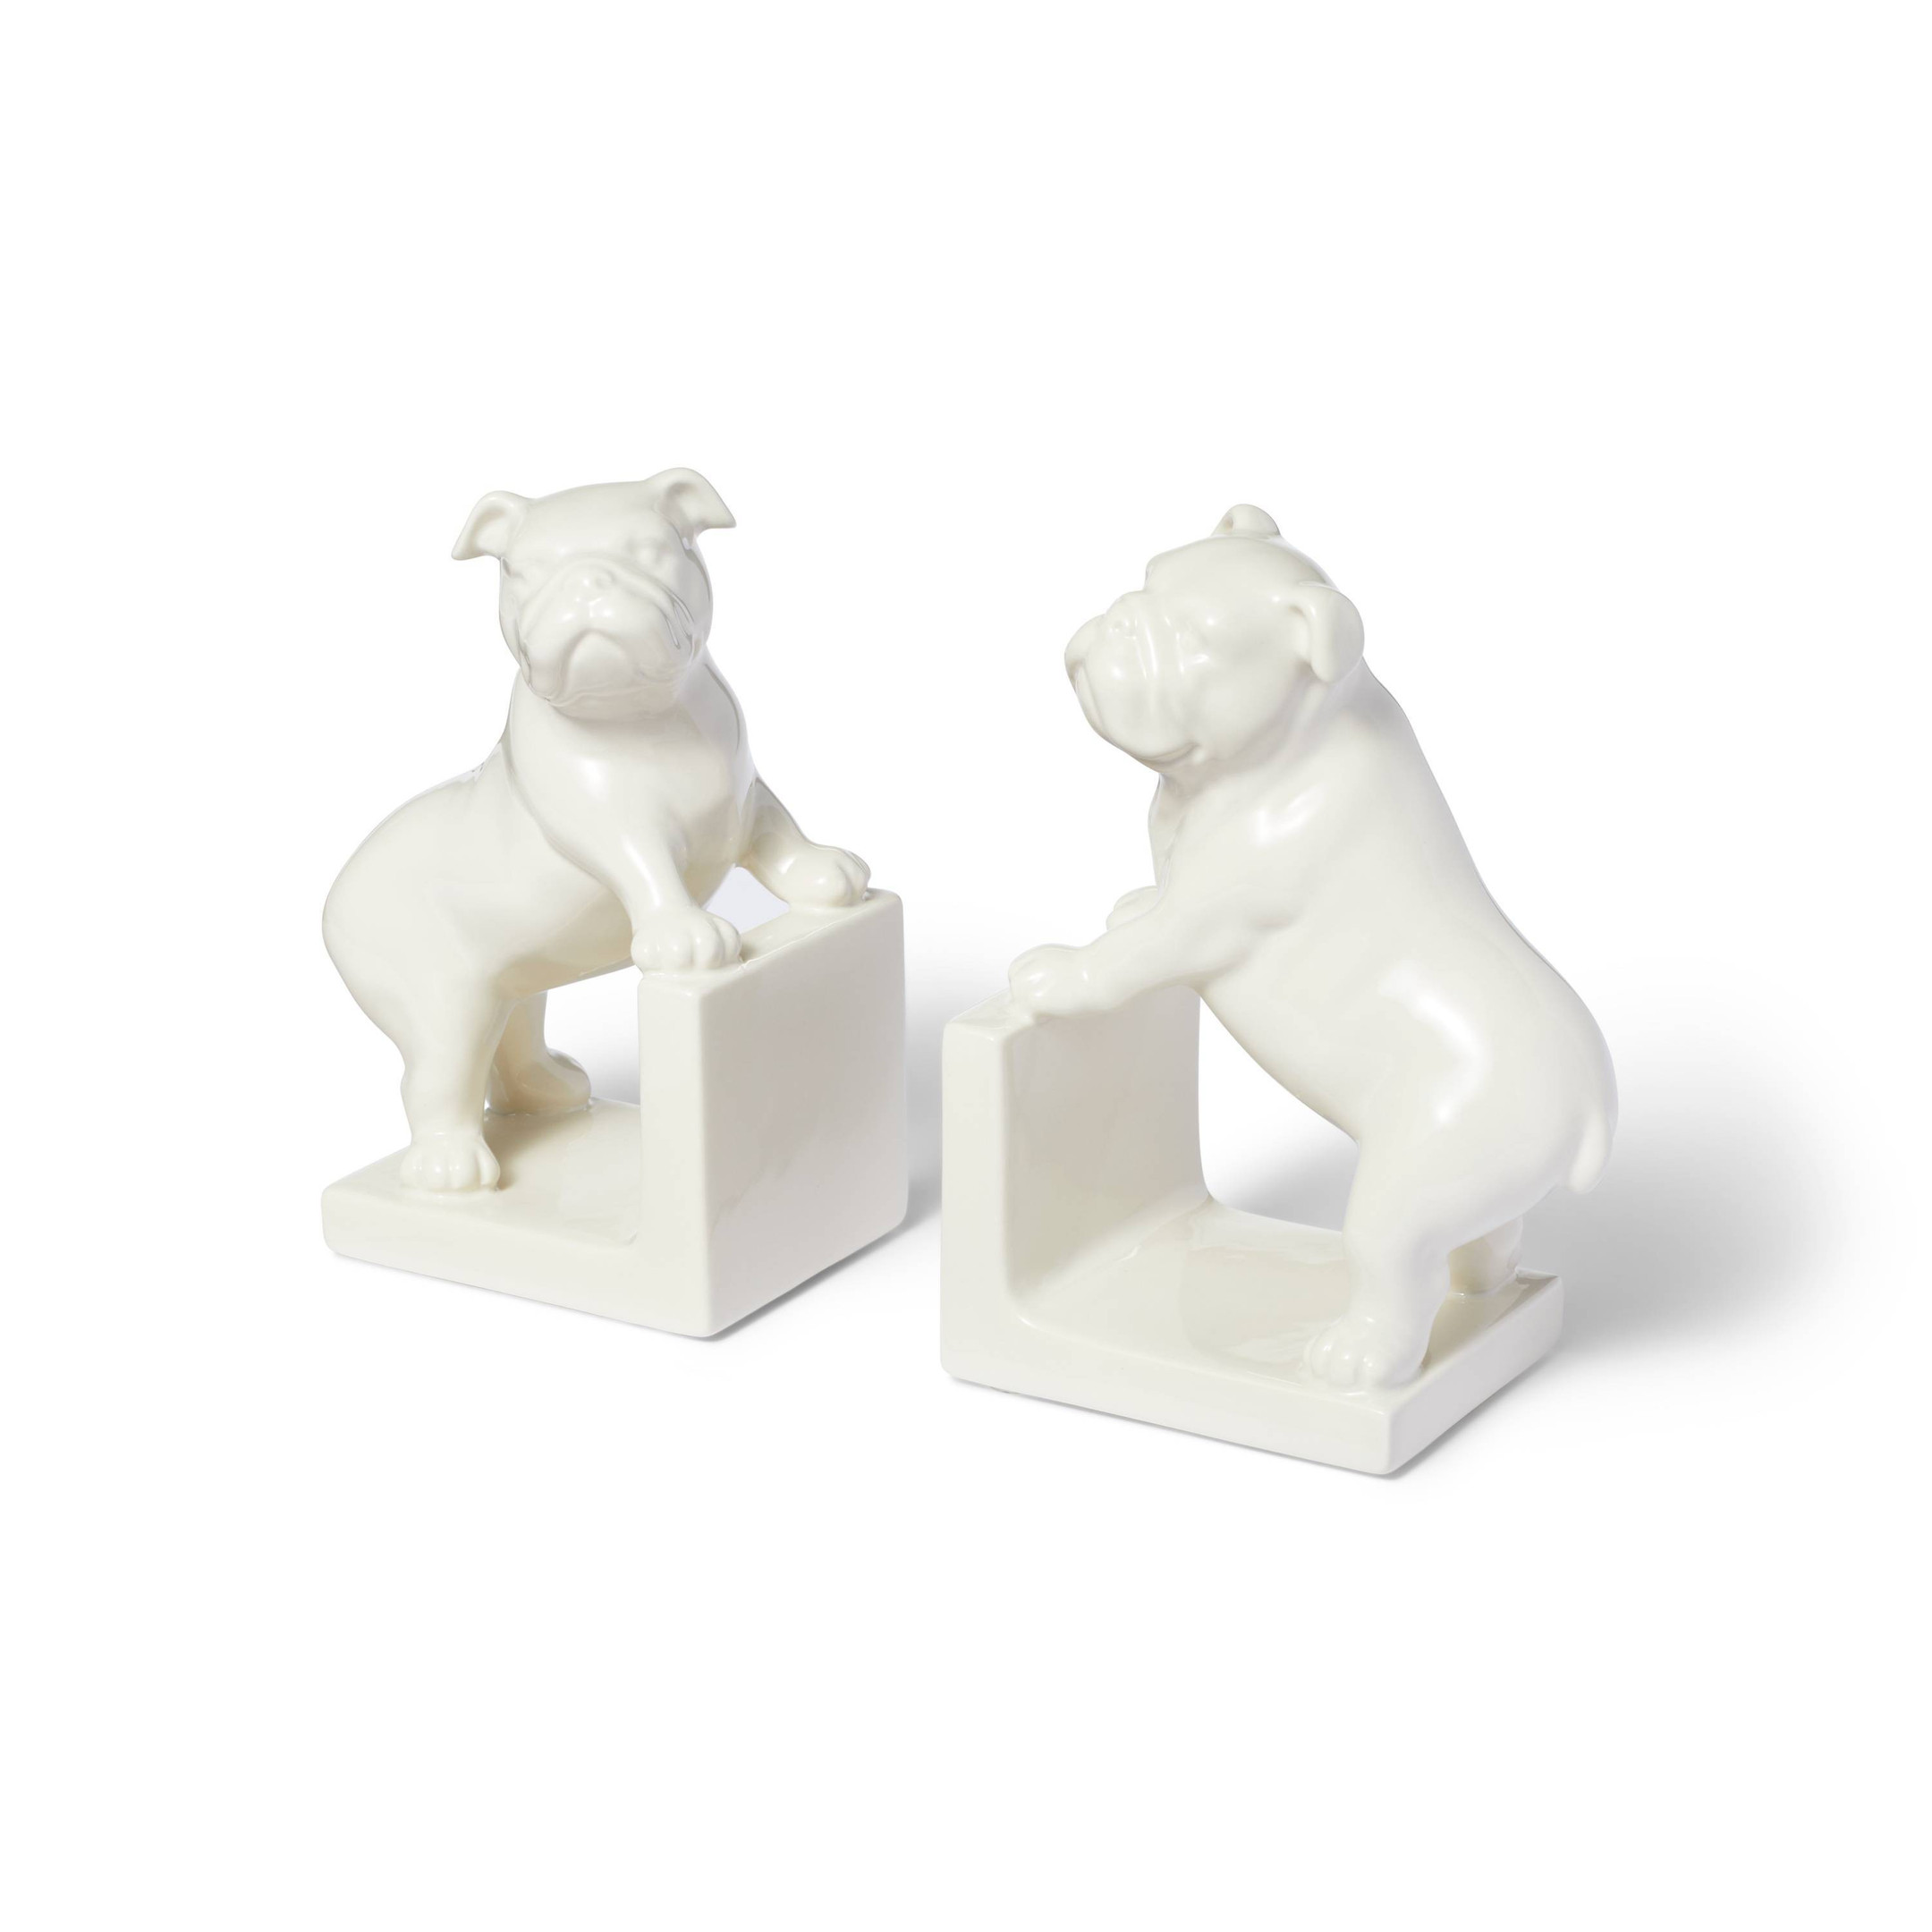 Dog Decorative Bookends - Rowing Blazers x Target